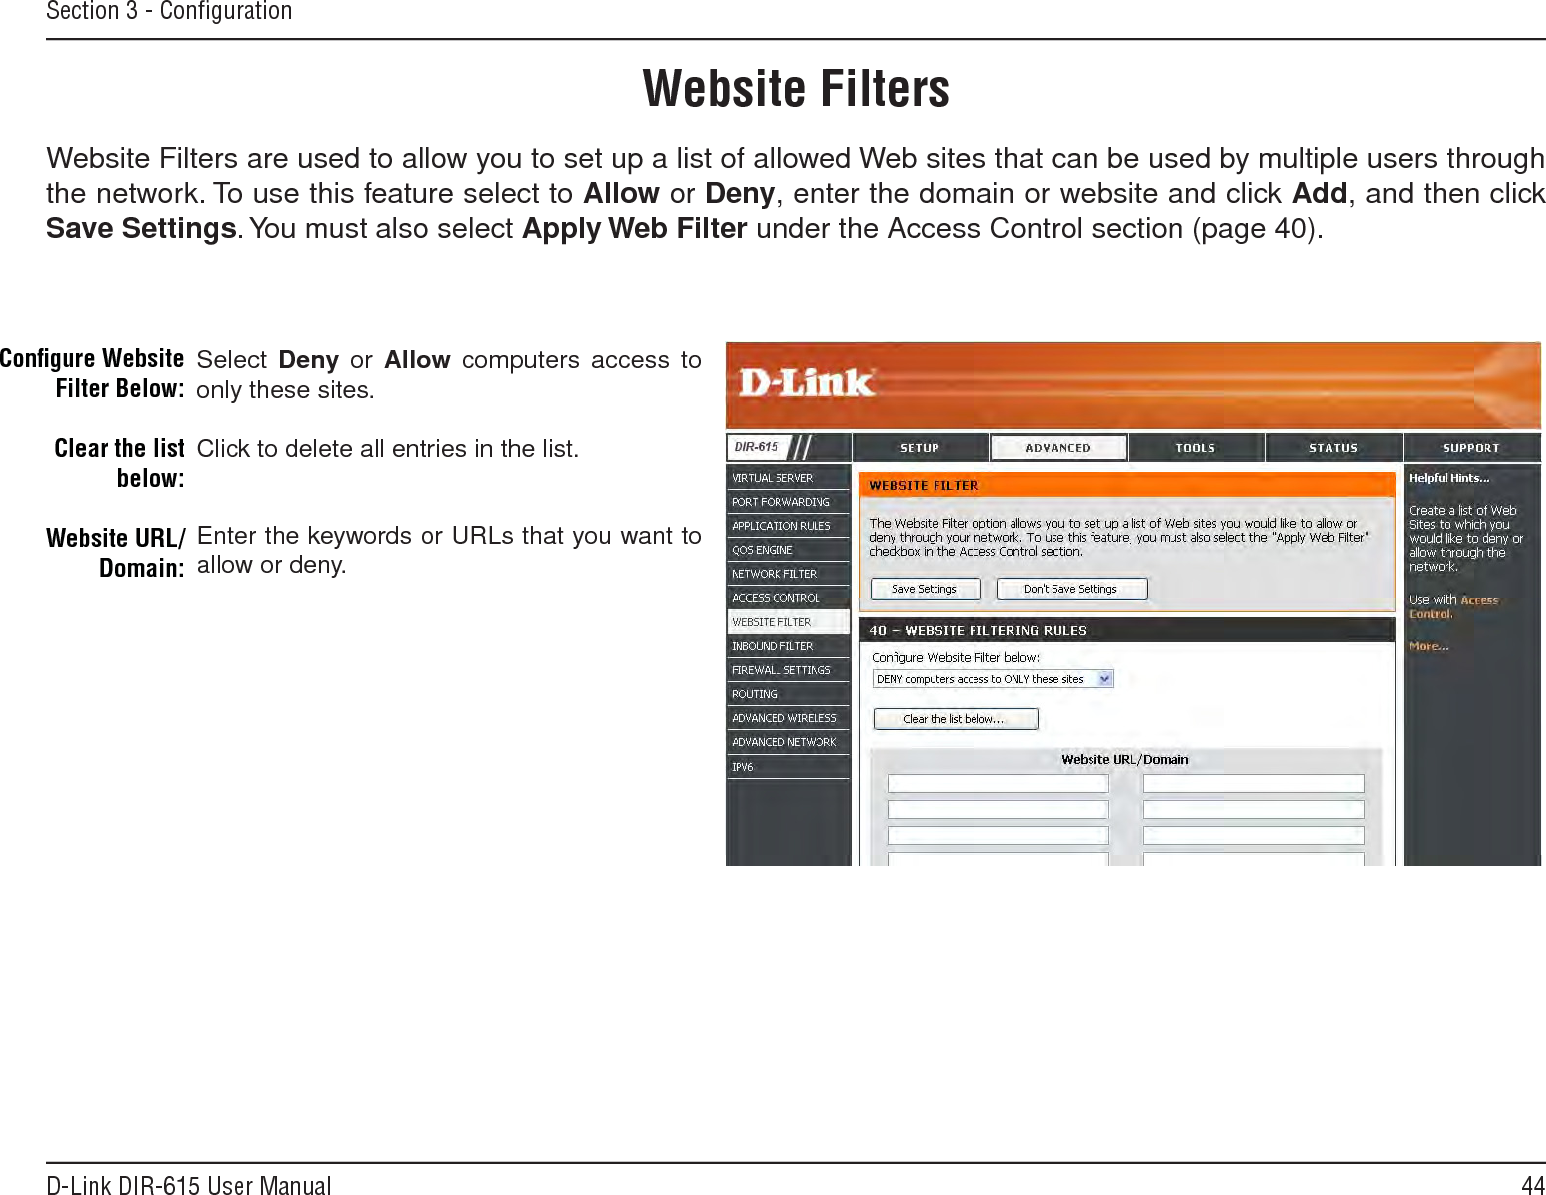 44D-Link DIR-615 User ManualSection 3 - ConﬁgurationSelect Deny  or Allow computers access to only these sites.Click to delete all entries in the list.Enter the keywords or URLs that you want to allow or deny.Conﬁgure Website Filter Below:Clear the list below:Website URL/Domain:Website FiltersWebsite Filters are used to allow you to set up a list of allowed Web sites that can be used by multiple users through the network. To use this feature select to Allow or Deny, enter the domain or website and click Add, and then click Save.Settings. You must also select Apply.Web.Filter under the Access Control section (page 40).